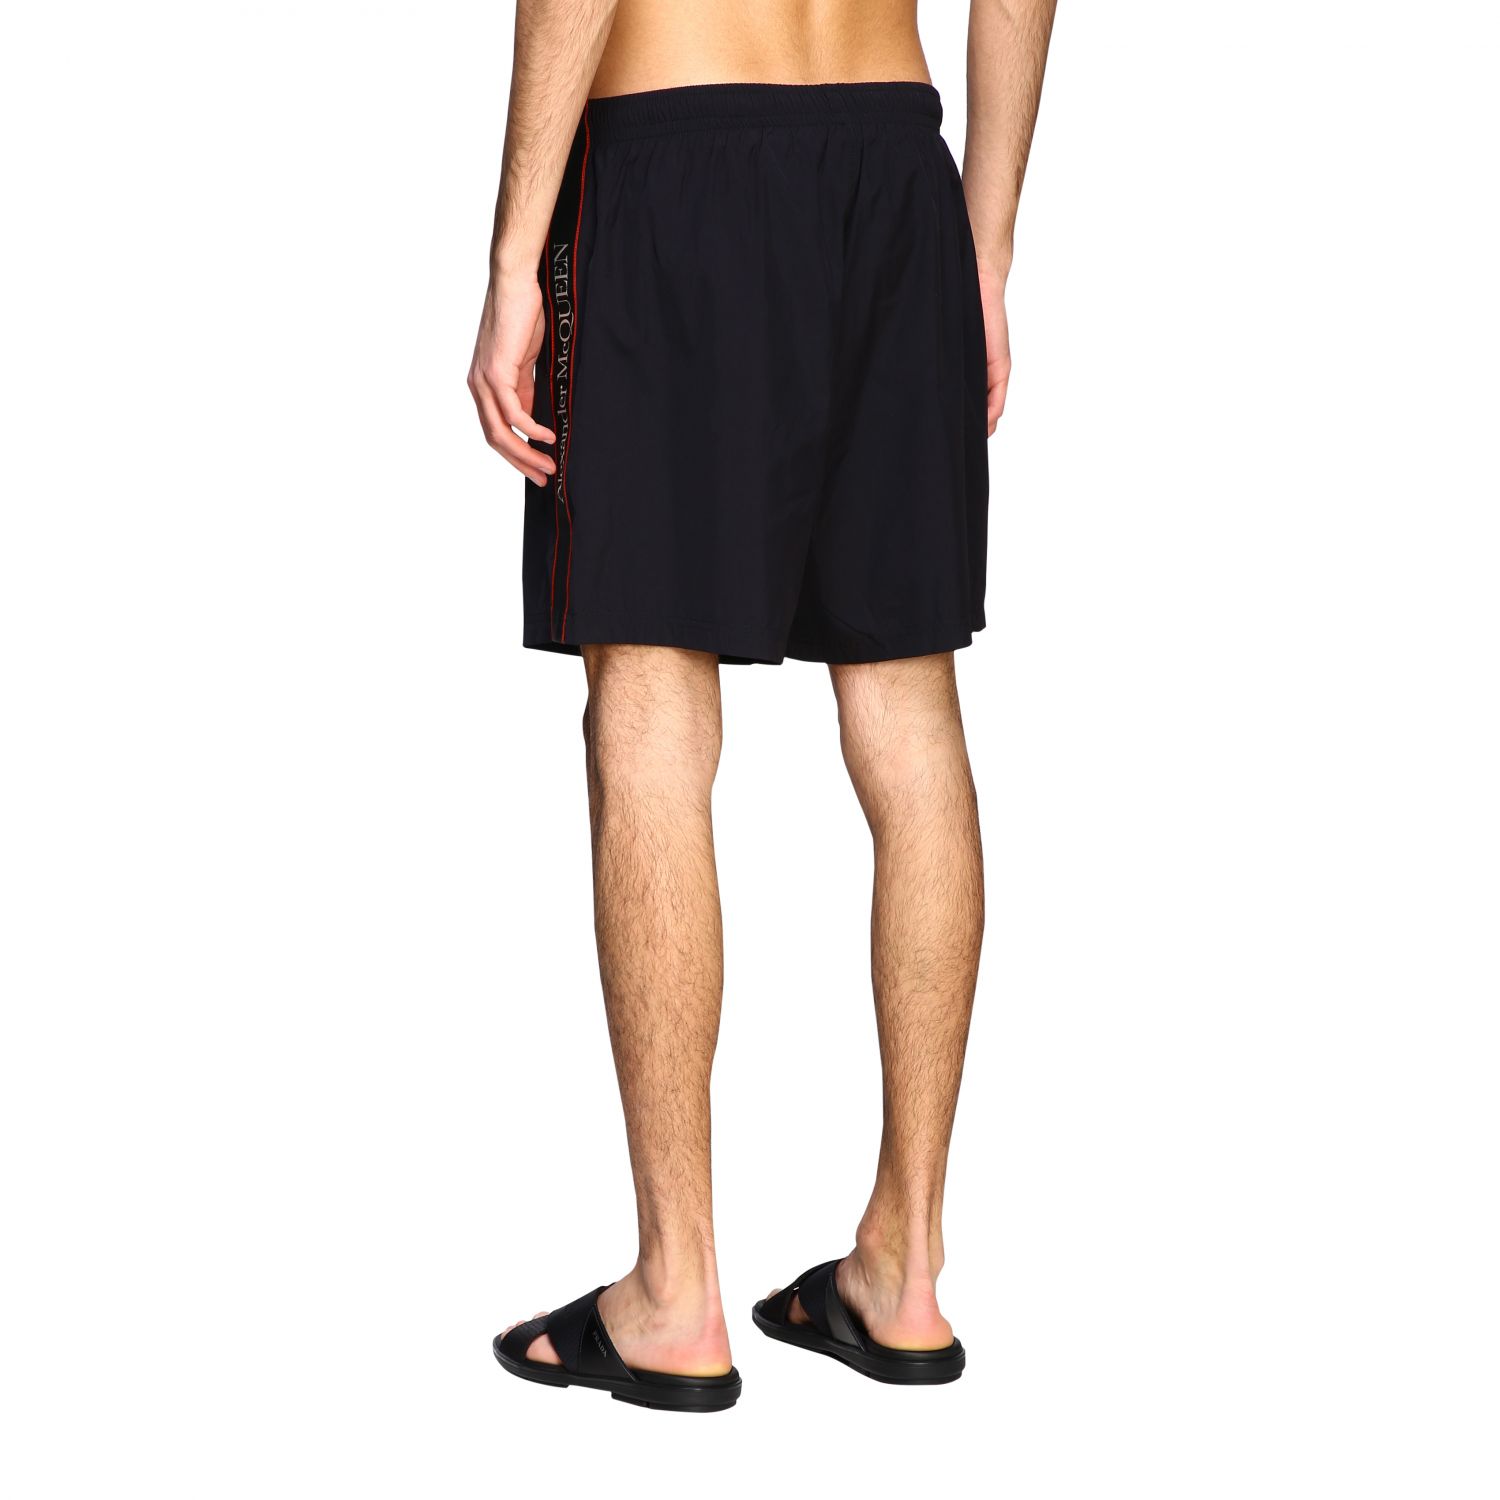 Alexander Mcqueen boxer swimsuit with logoed bands